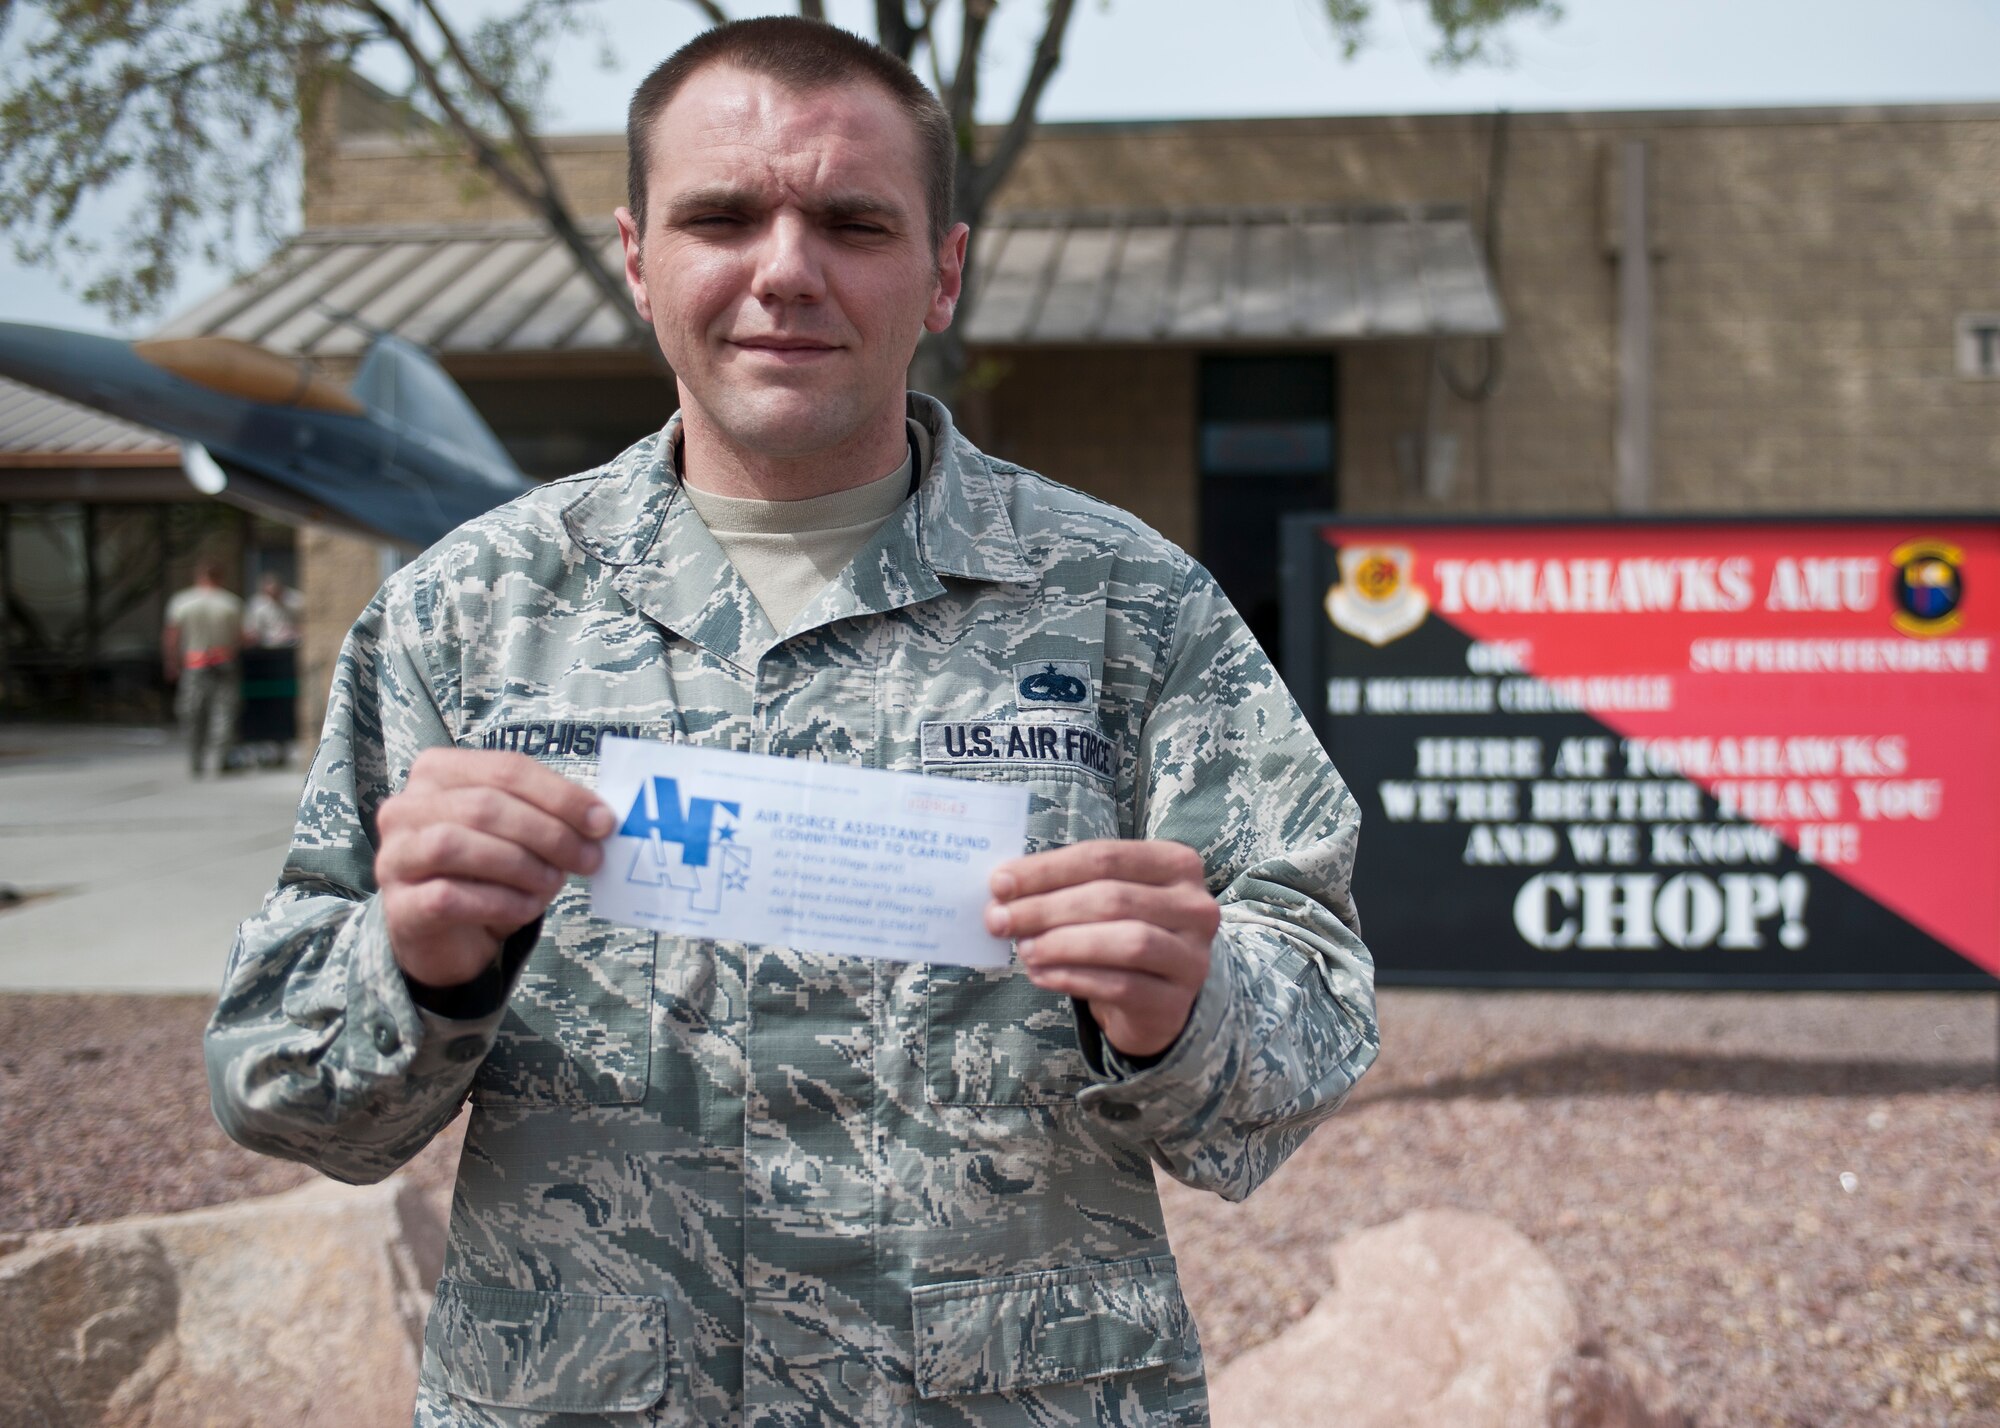 Master Sgt. Dennis Hutchison, 57th Aircraft Maintenance Squadron Tomahawks Aircraft Maintenance Unit production superintendent, poses for a photo with his pledge form for the 2015 Air Force Assistance Fund drive at Nellis Air Force Base, Nev., March 17, 2015. The AFAF drive will run from March 23 until May 1 at Nellis and Creech AFBs, and the Nevada Test and Training Range, and is looking to raise $175,602 for the Air Force Aid Society, the Air Force Enlisted Village, the Air Force Villages Charitable Foundation, and the General and Mrs. Curtis E. LeMay Foundation. (U.S. Air Force photo by Staff Sgt. Siuta B. Ika)